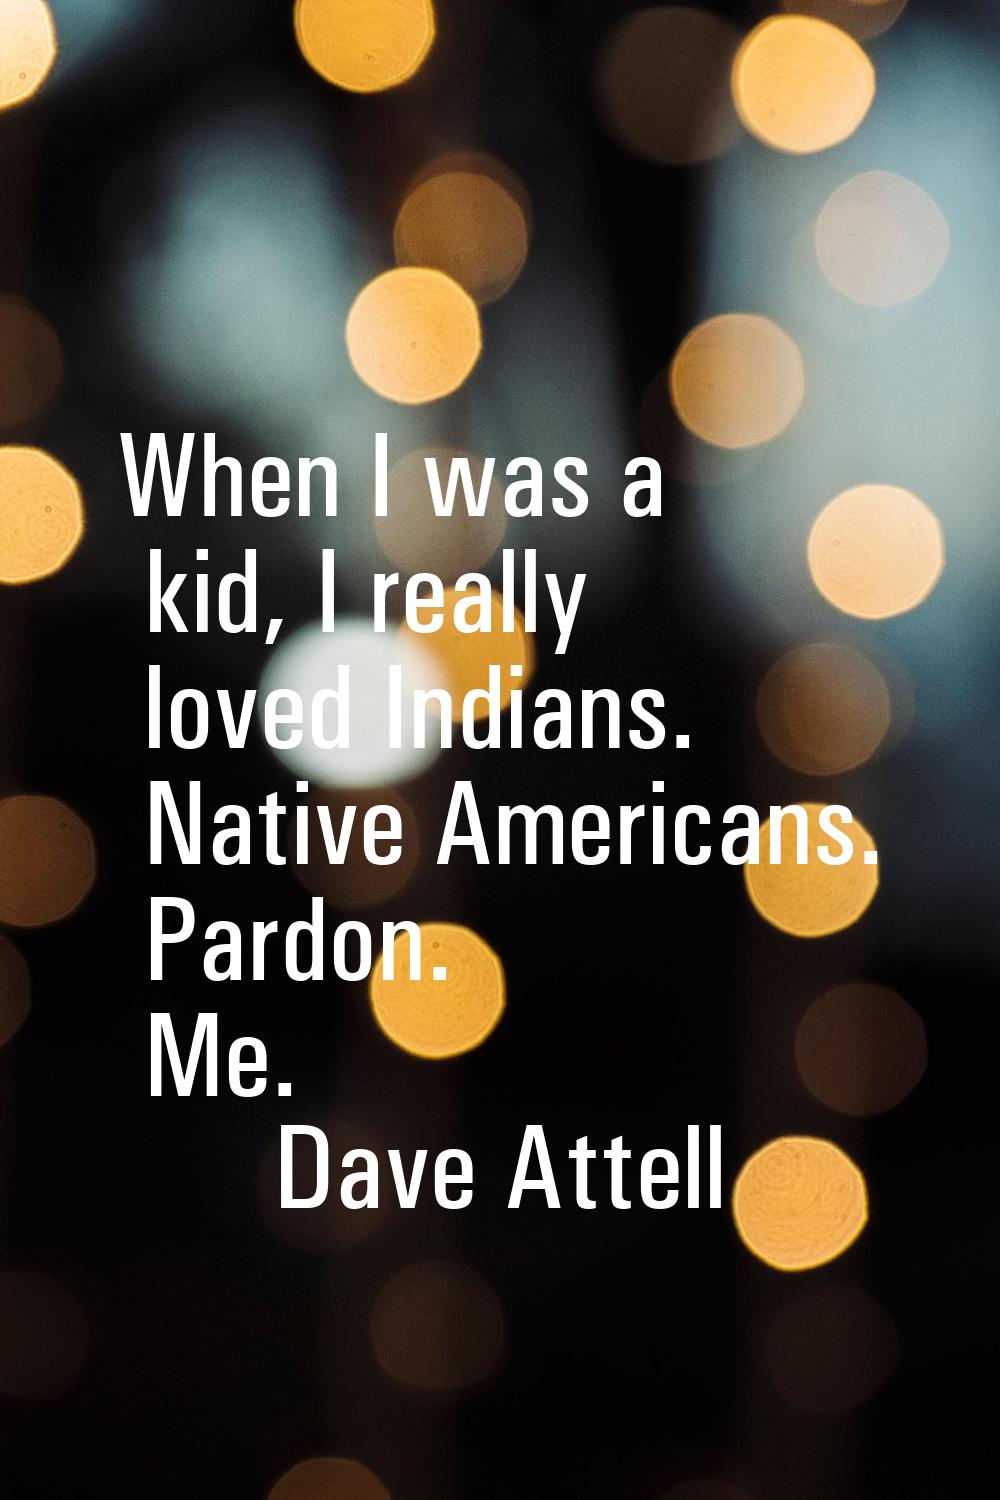 When I was a kid, I really loved Indians. Native Americans. Pardon. Me.